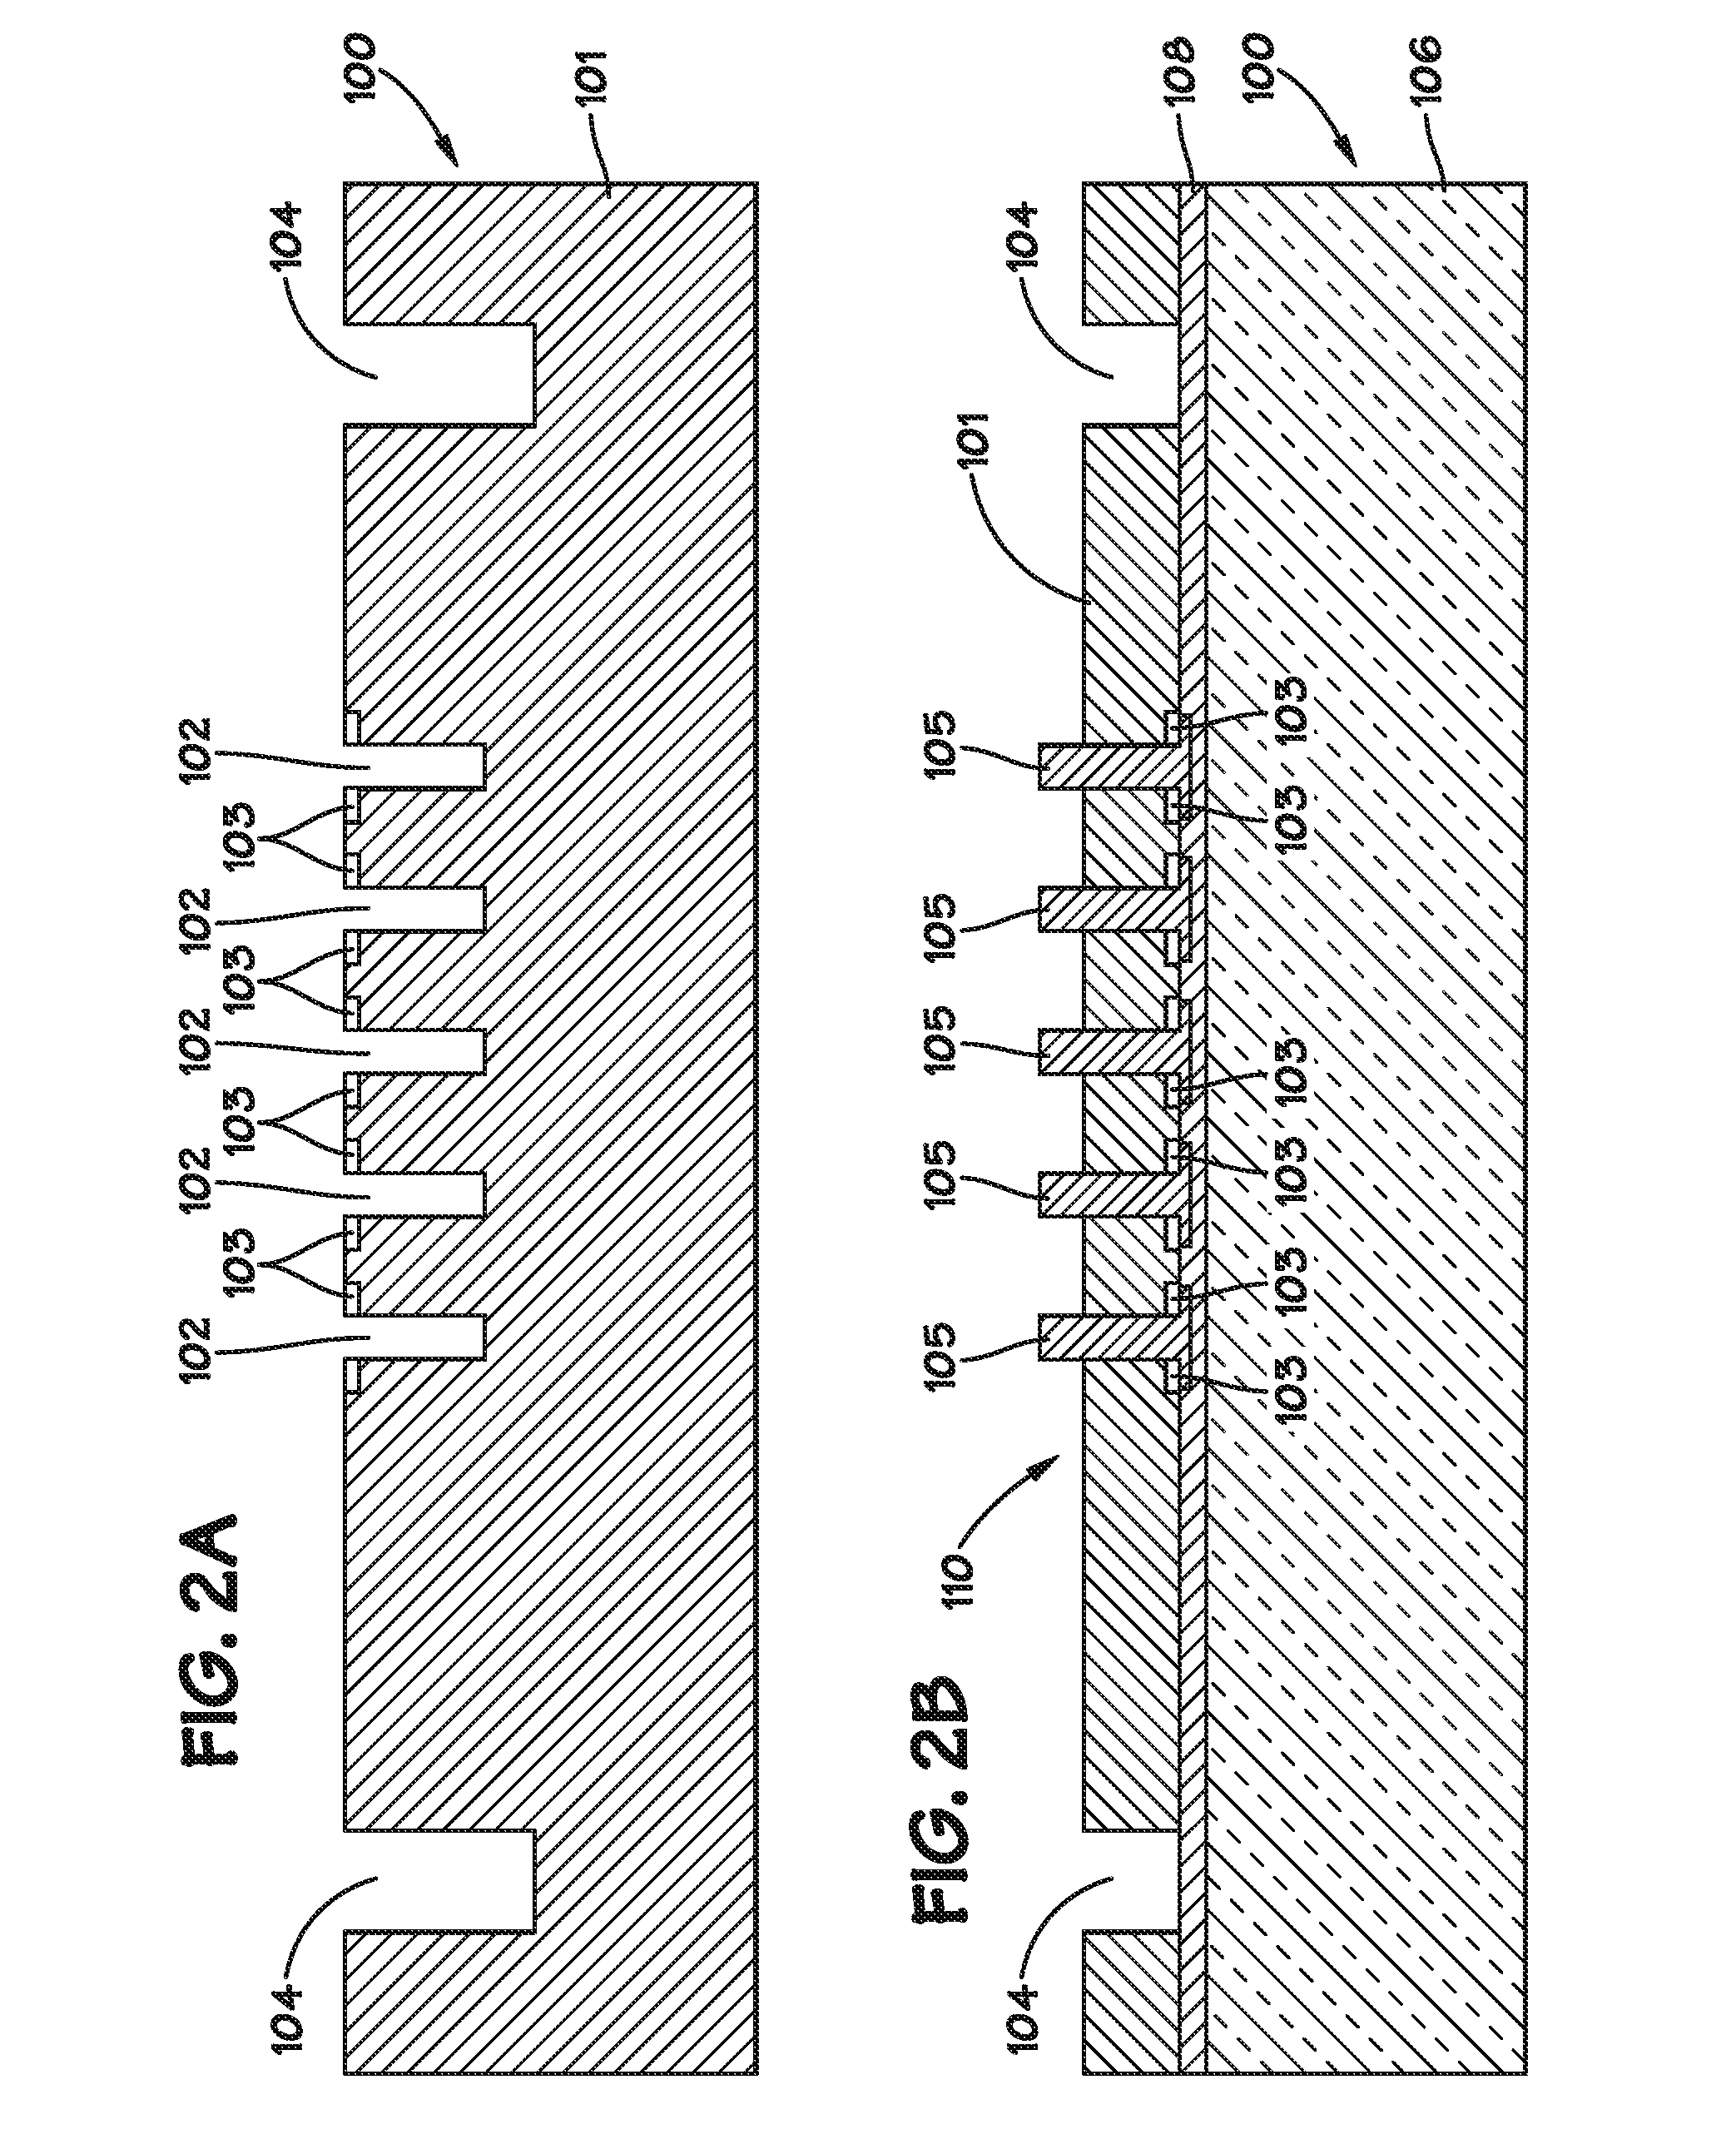 Method of Creating Alignment/Centering Guides for Small Diameter, High Density Through-Wafer Via Die Stacking